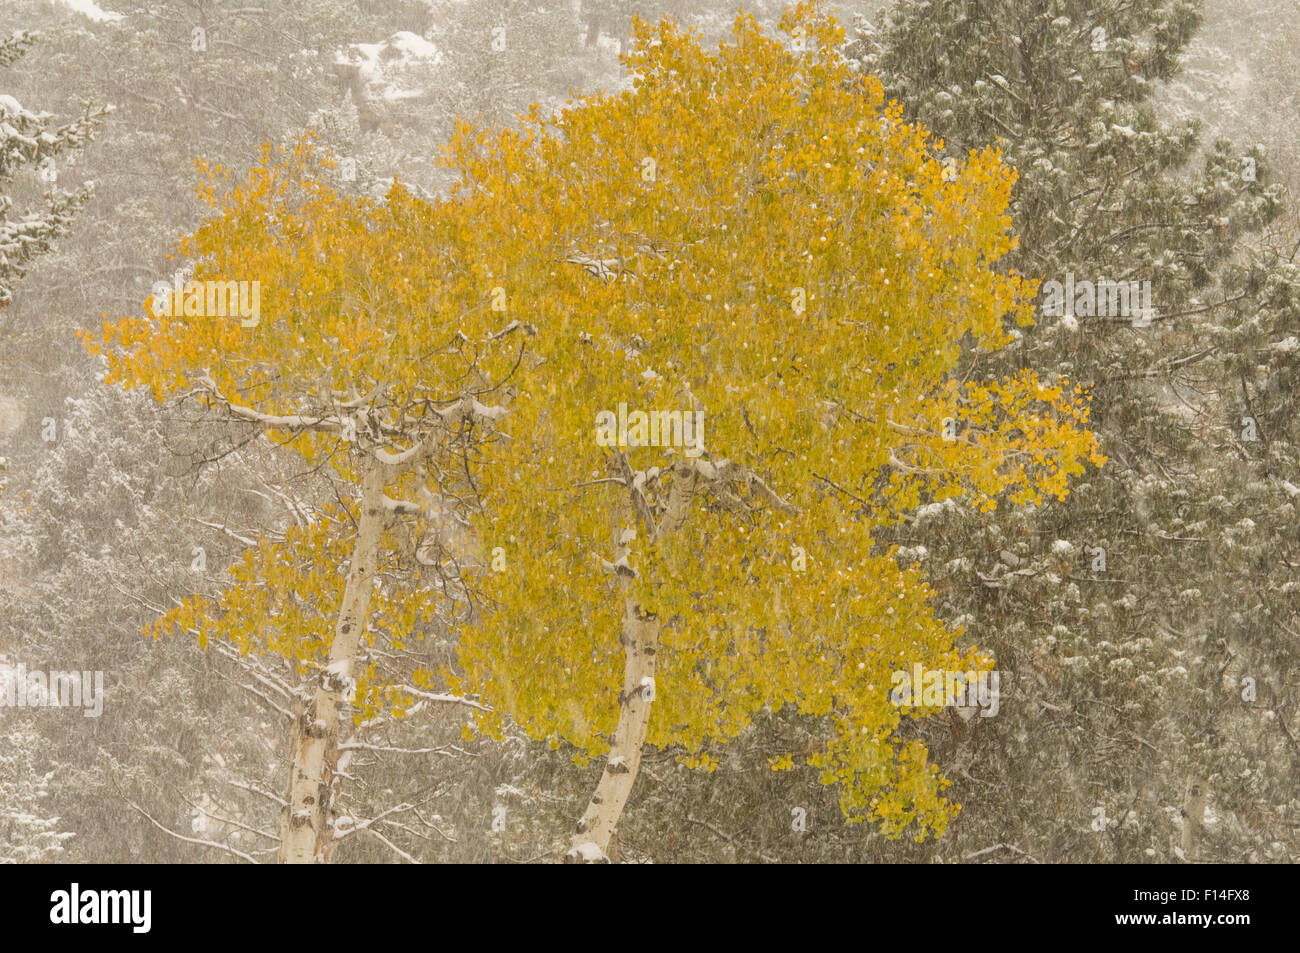 ASPEN TREES IN YELLOW AUTUMN COLOR DURING SNOW FALL Stock Photo